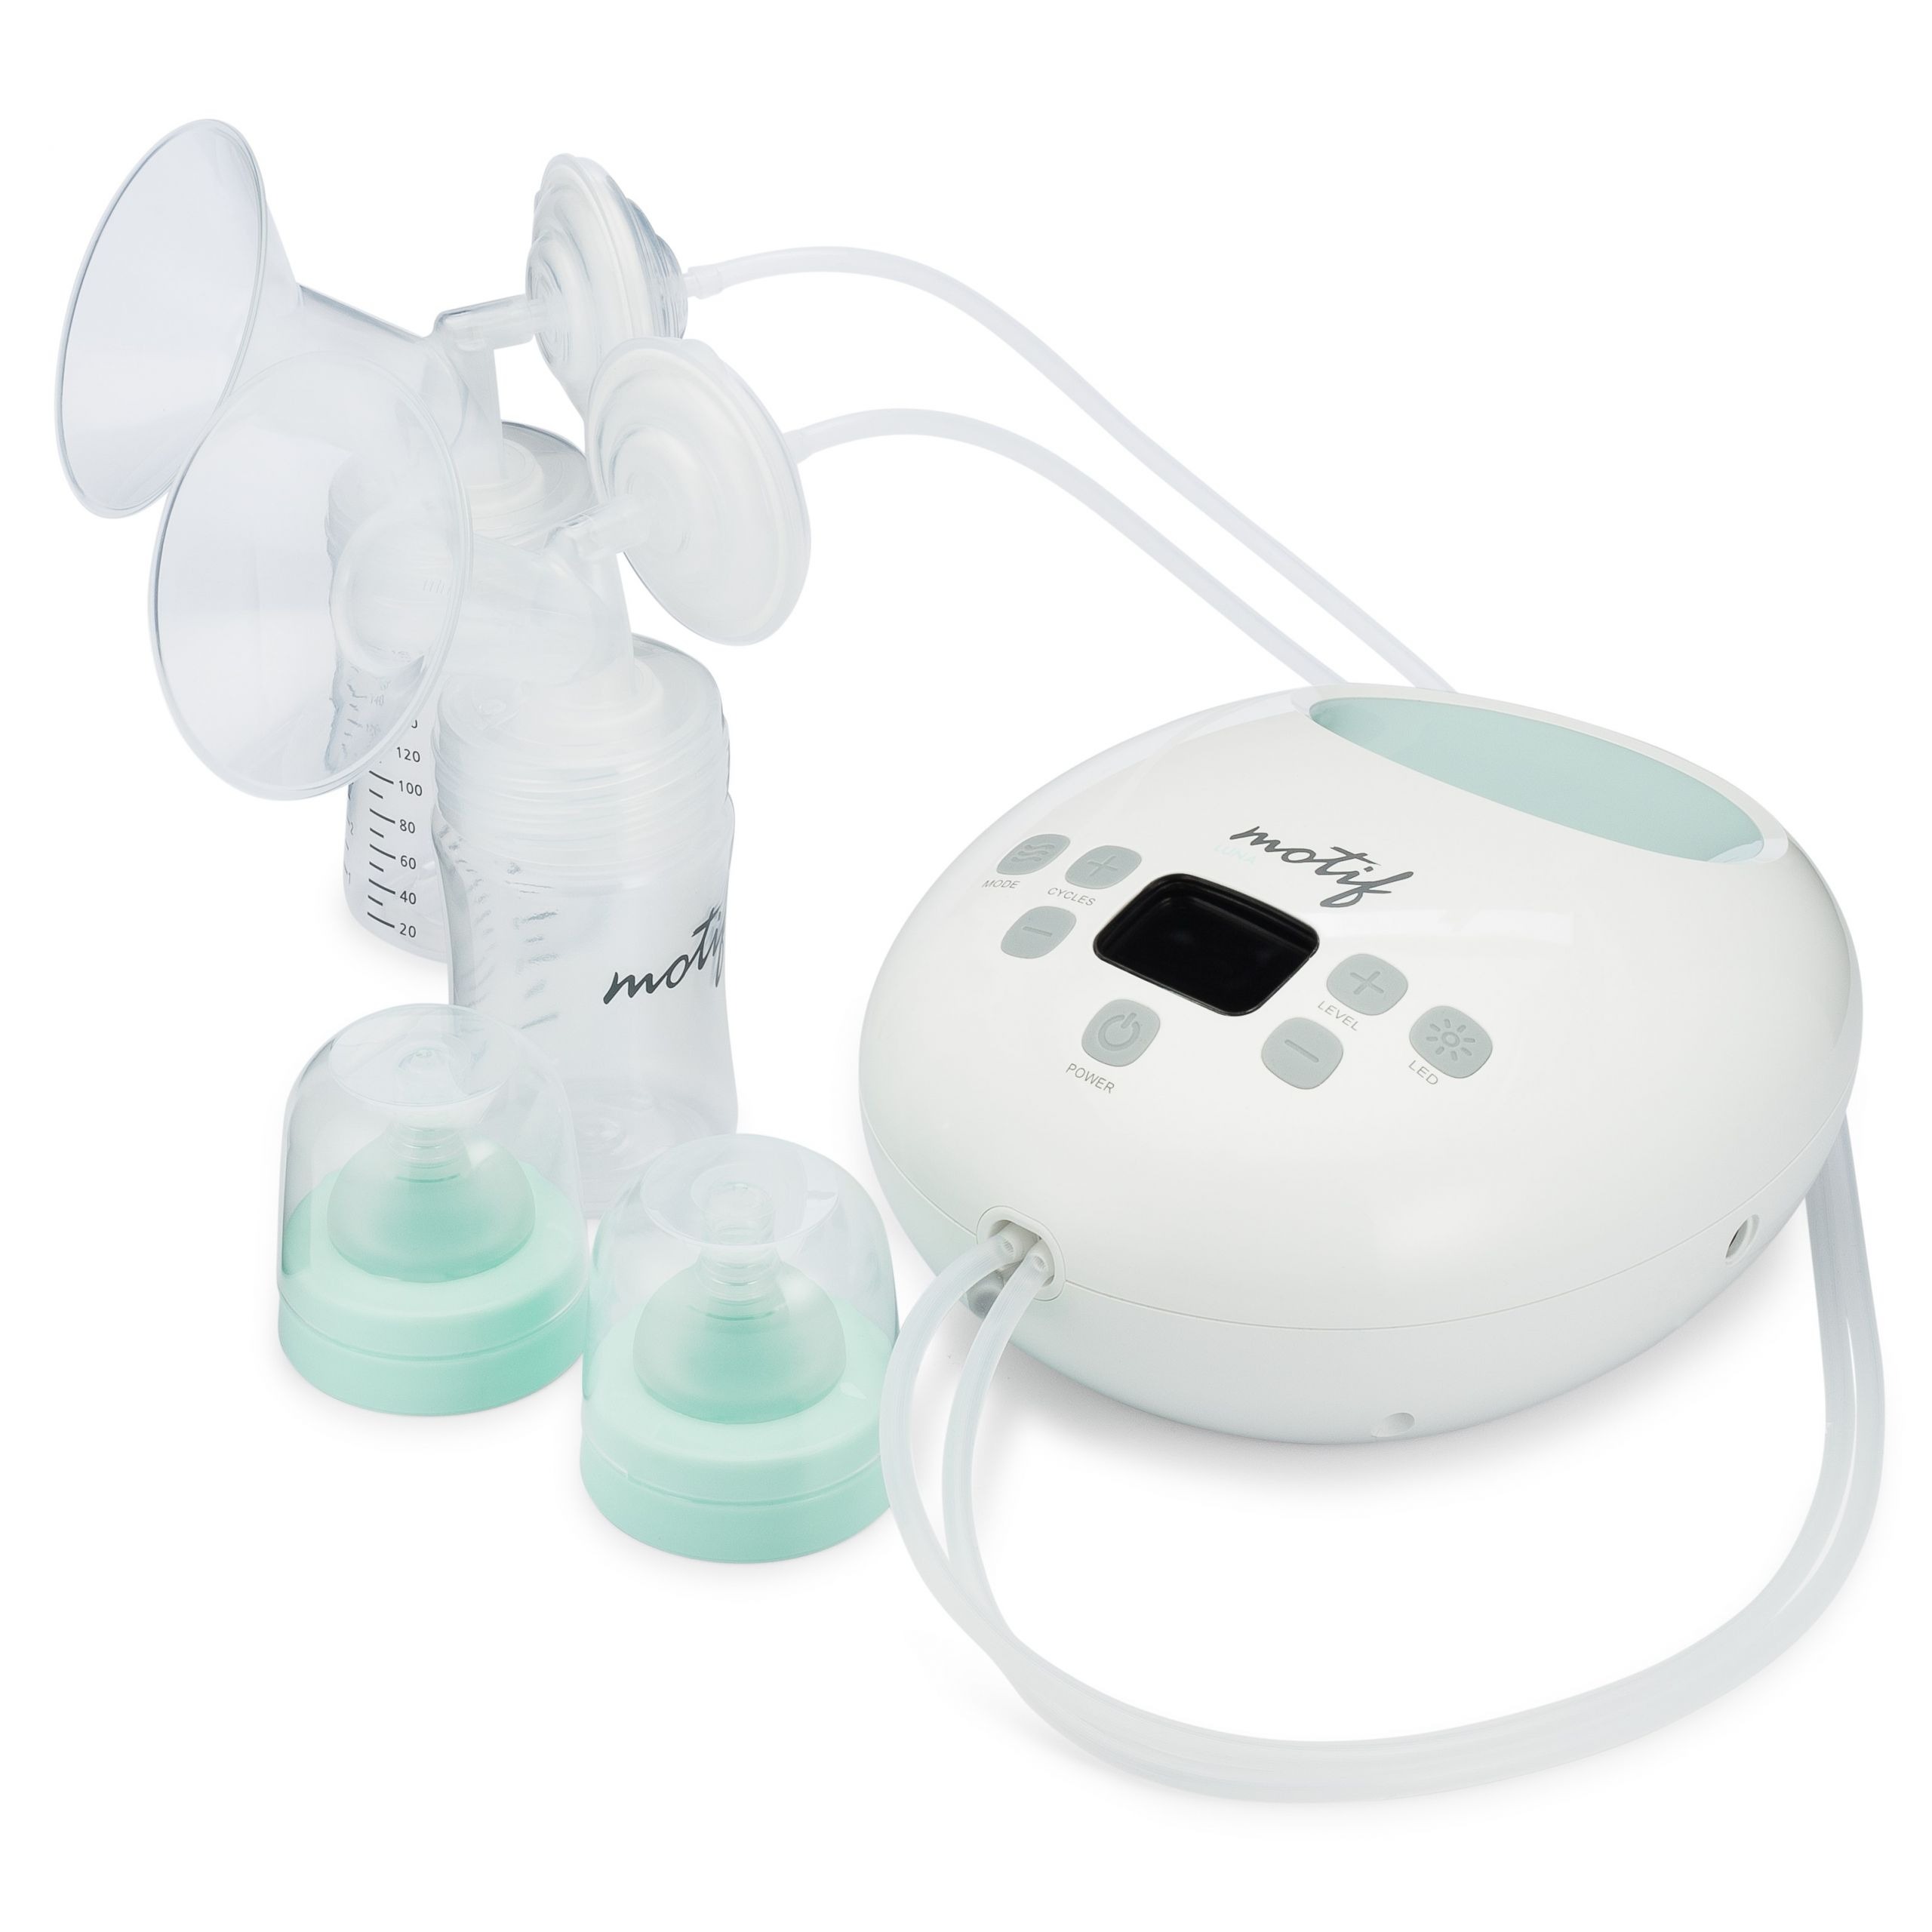 Luna Breast Pump and Supplies Covered by Insruance